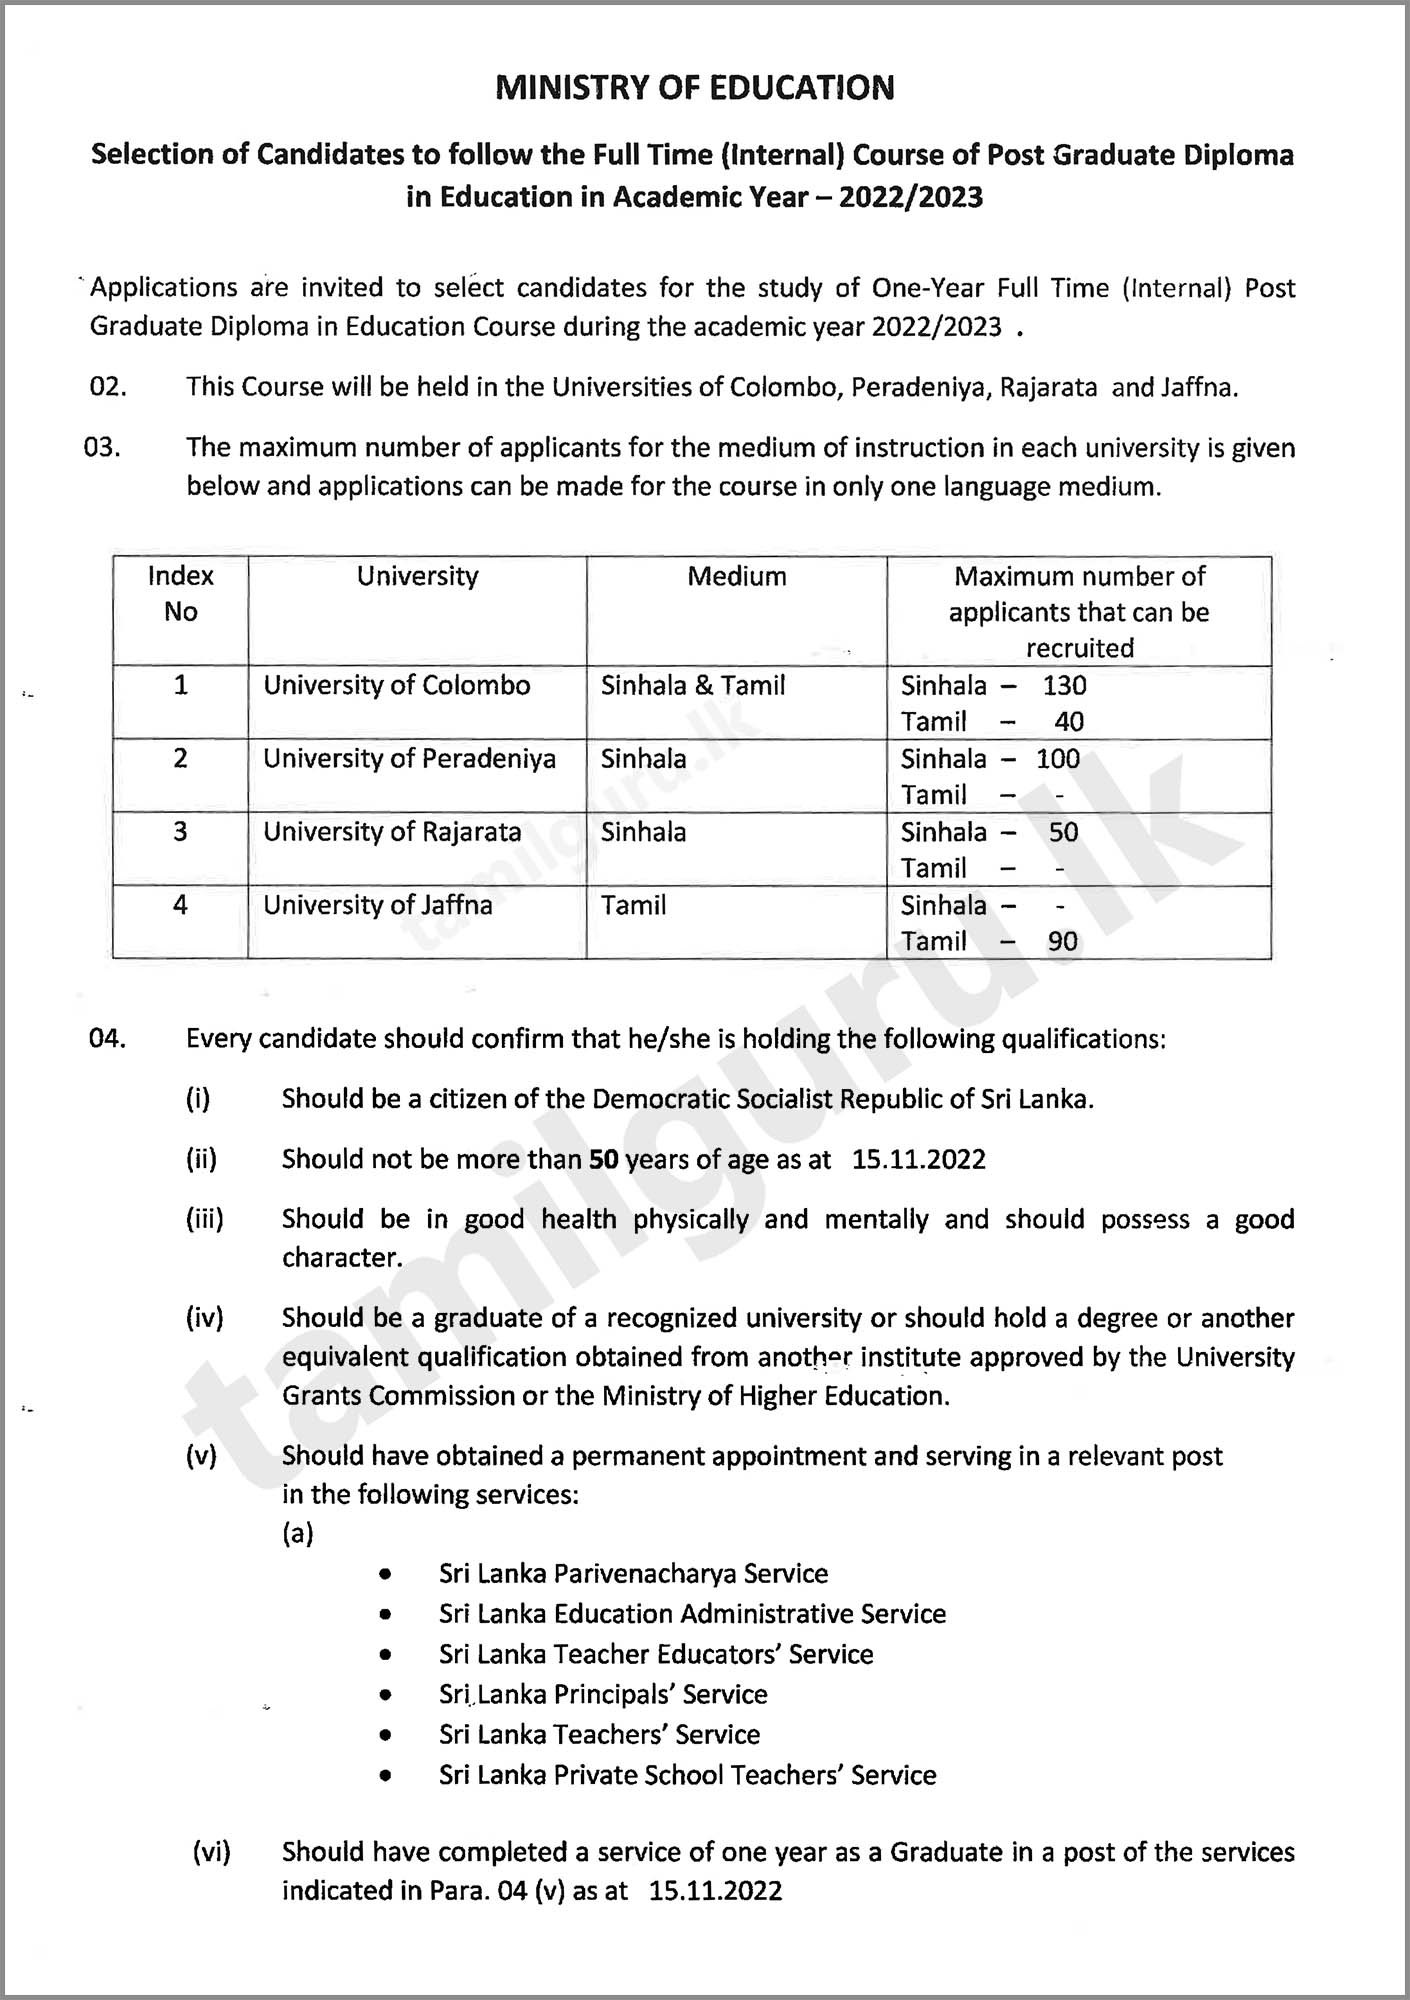 Postgraduate Diploma in Education (PGDE) Application 2022,2023 - Ministry of Education